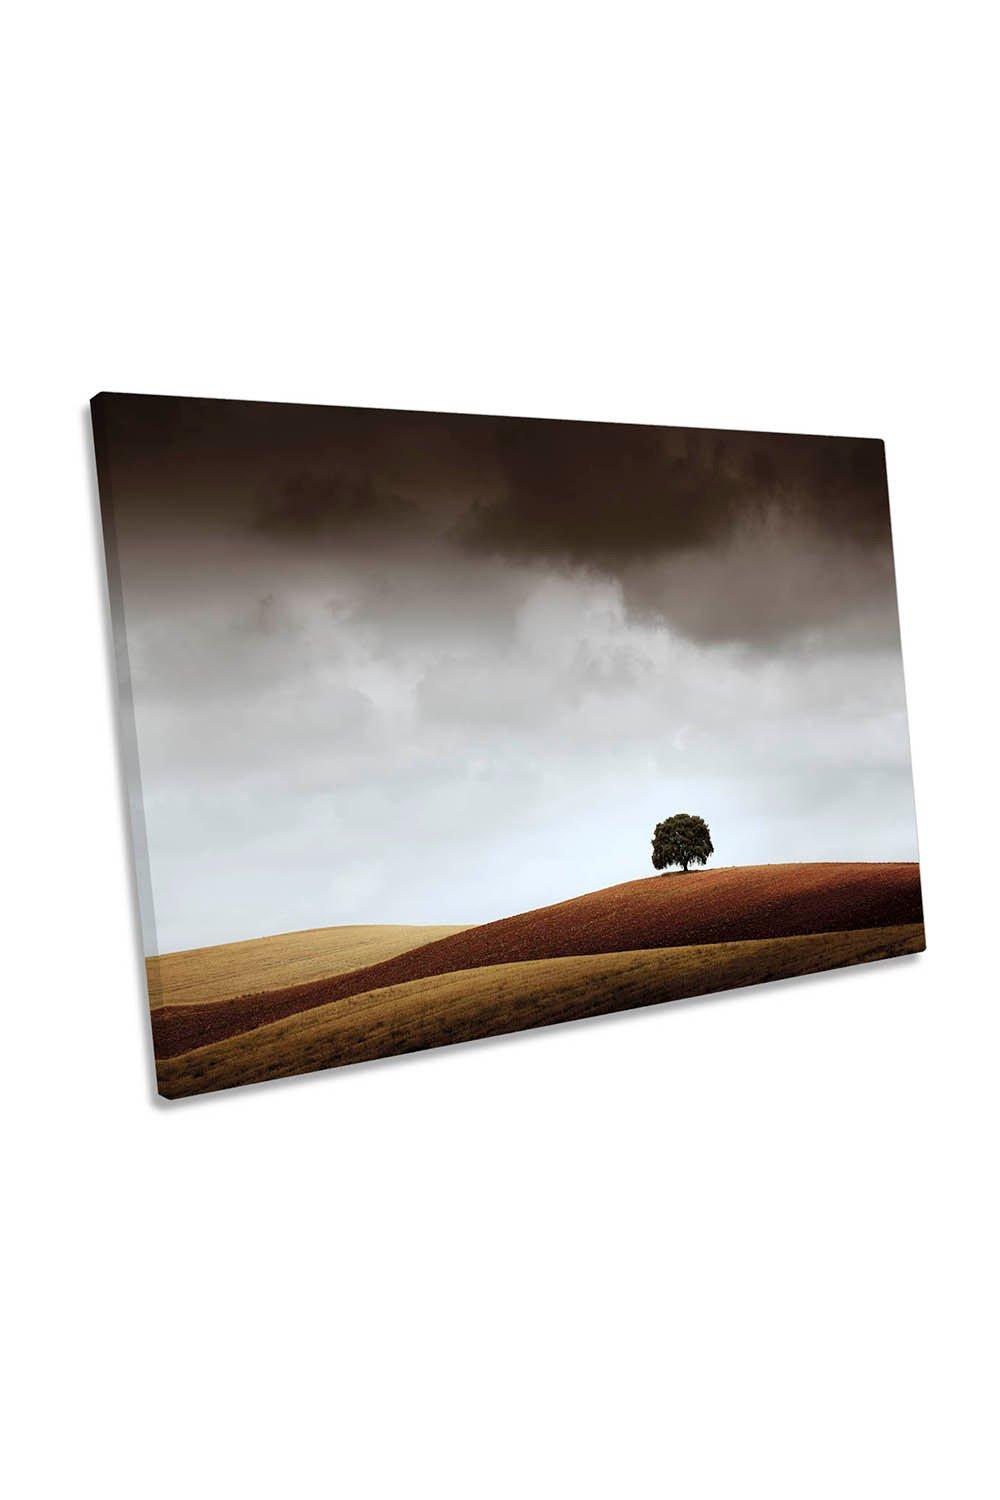 Lonely Tree Hills Landscape Field Canvas Wall Art Picture Print